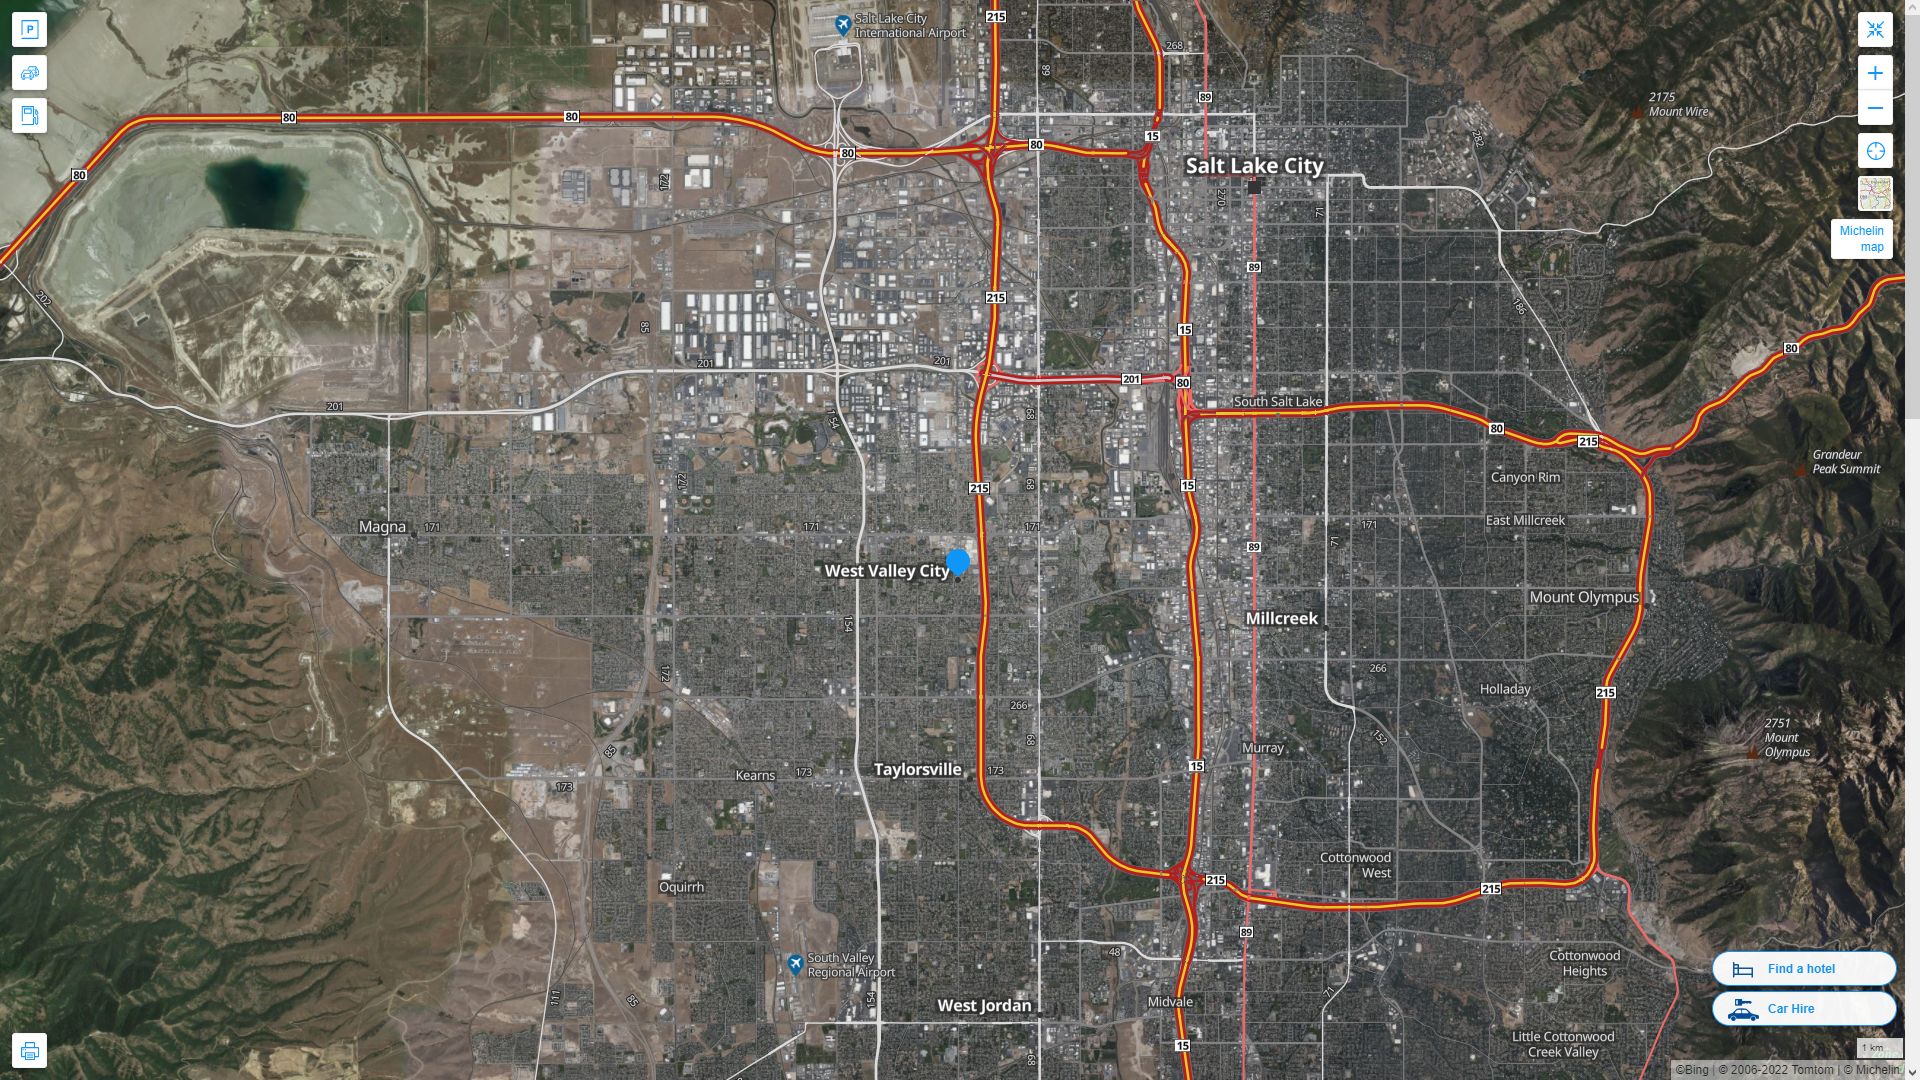 West Valley City Utah Highway and Road Map with Satellite View